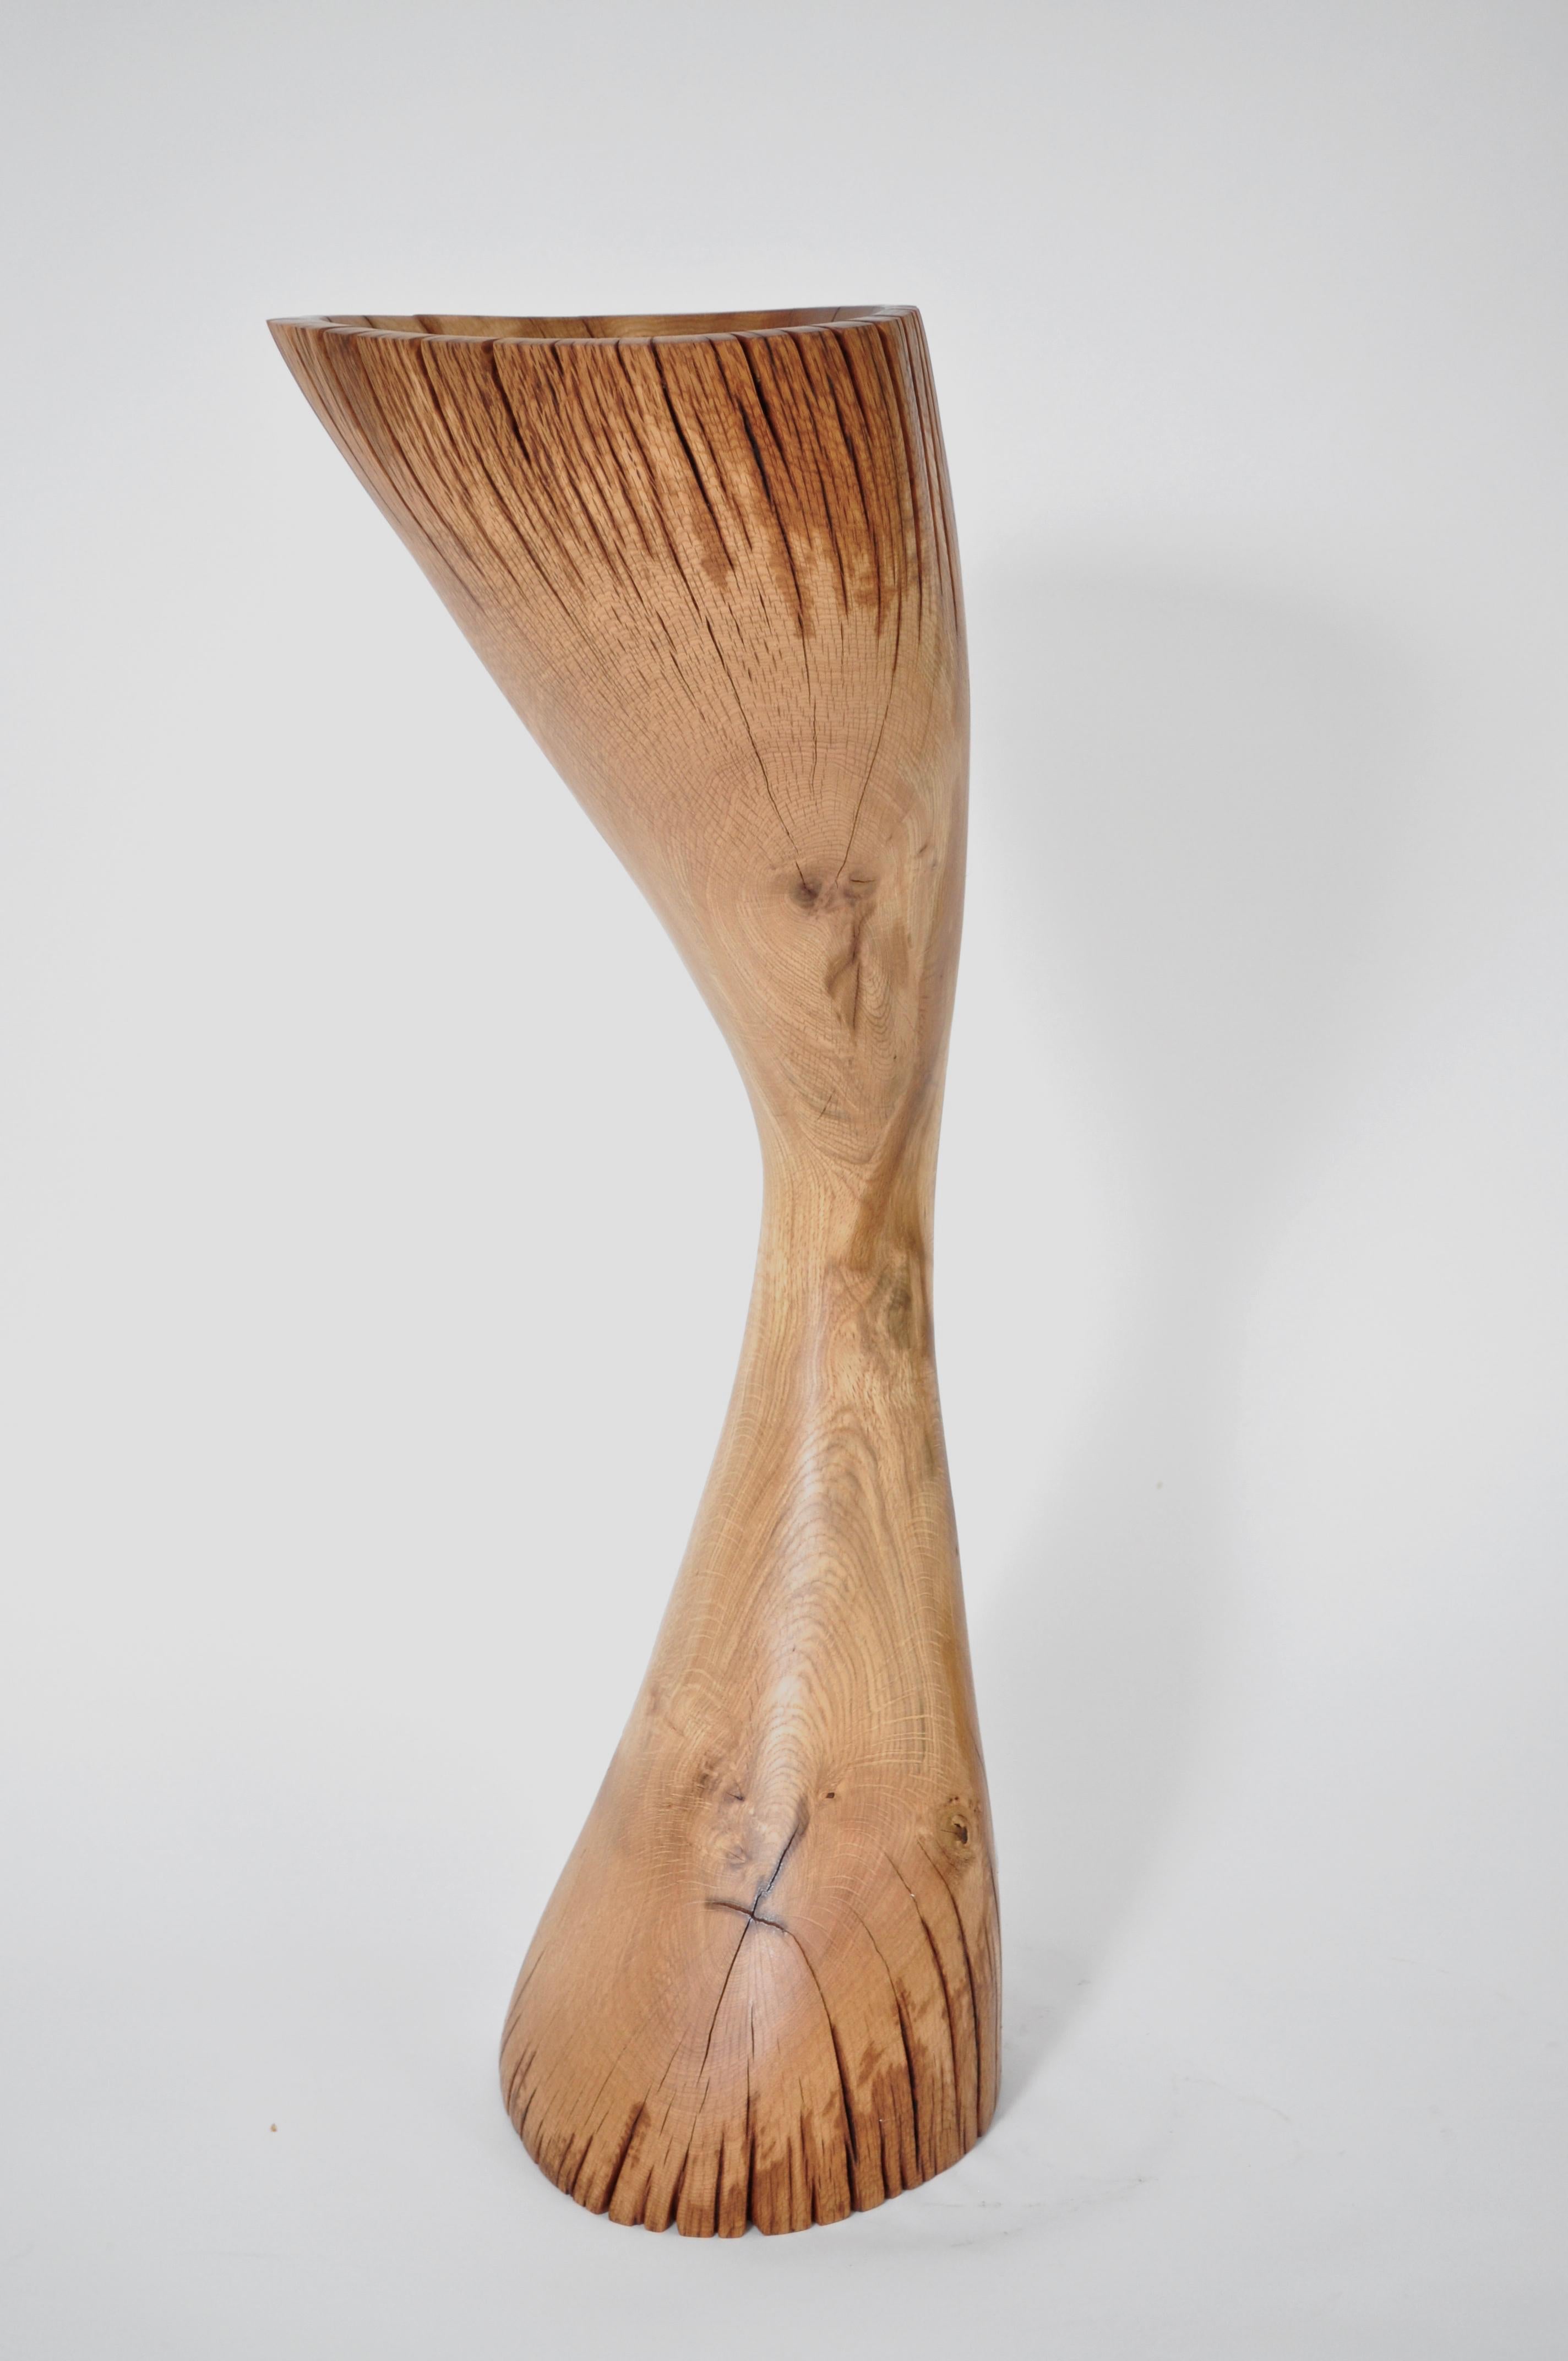 Oak vessel 1254 by Jörg Pietschmann
Dimensions: D 30 x W 34 x H 97 cm 
Materials: oak. 
Finish: polished oil finish.


Carved out of from a curved oak trunk.
In Pietschmann’s sculptures, trees that for centuries were part of a landscape and